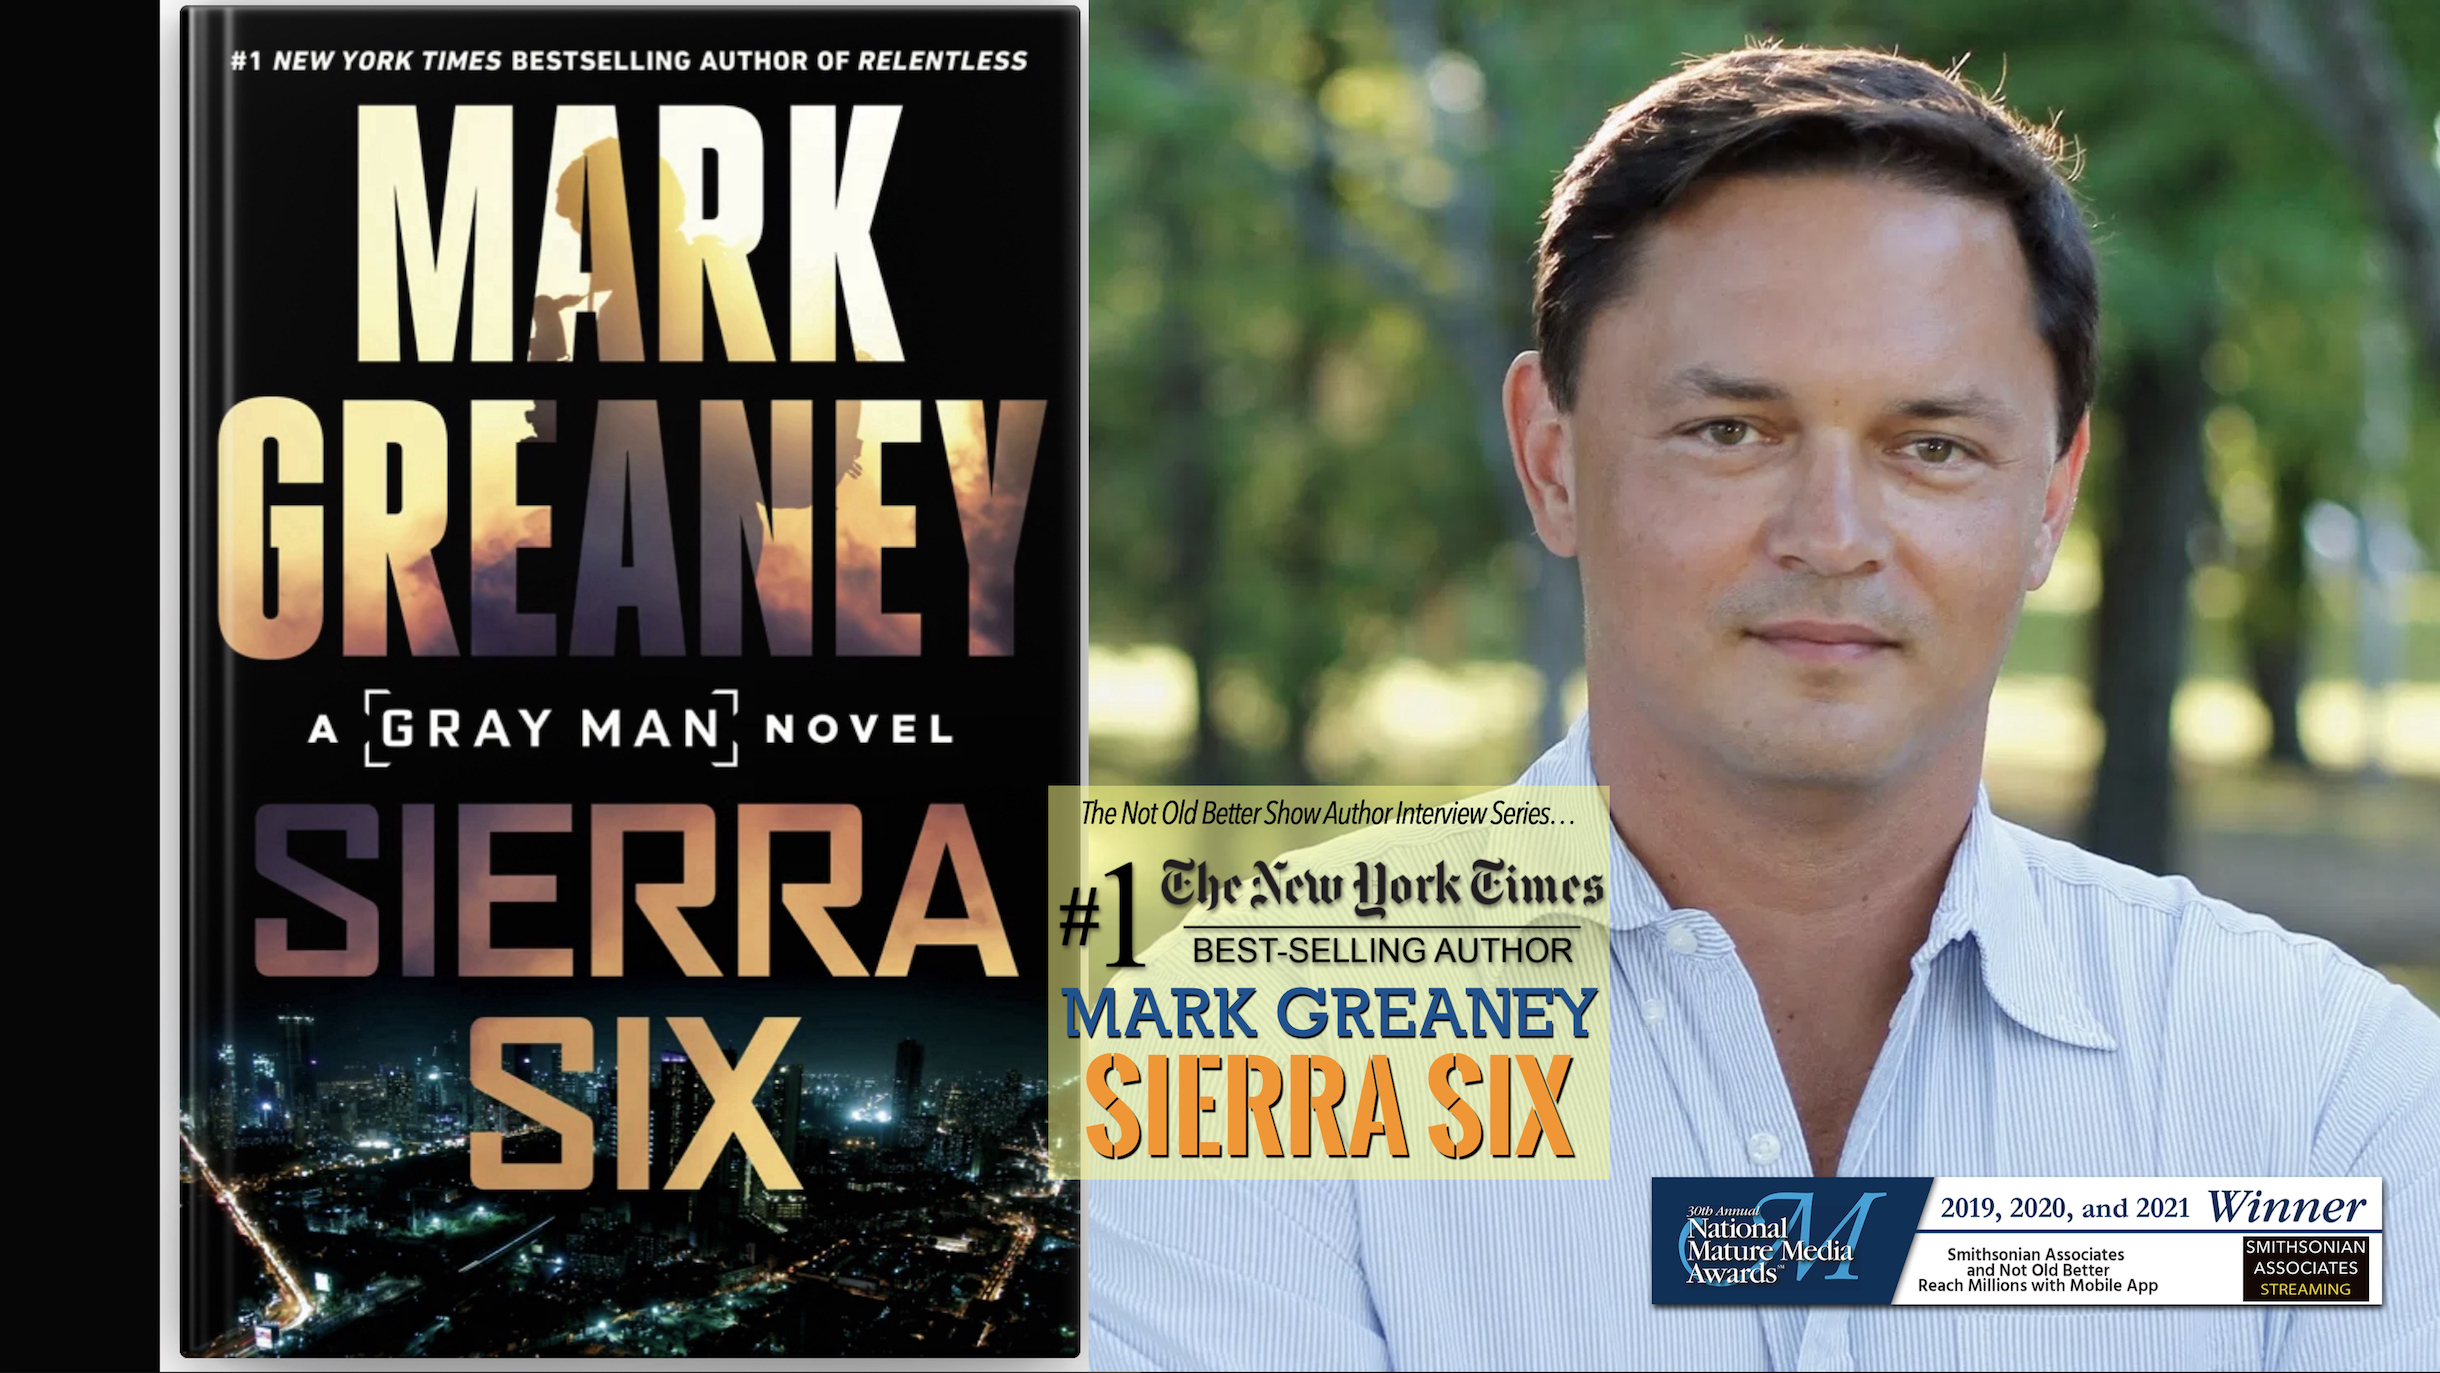 NYT Best Selling author Mark Greaney – The Gray Man – New Book! ‘Sierra Six’